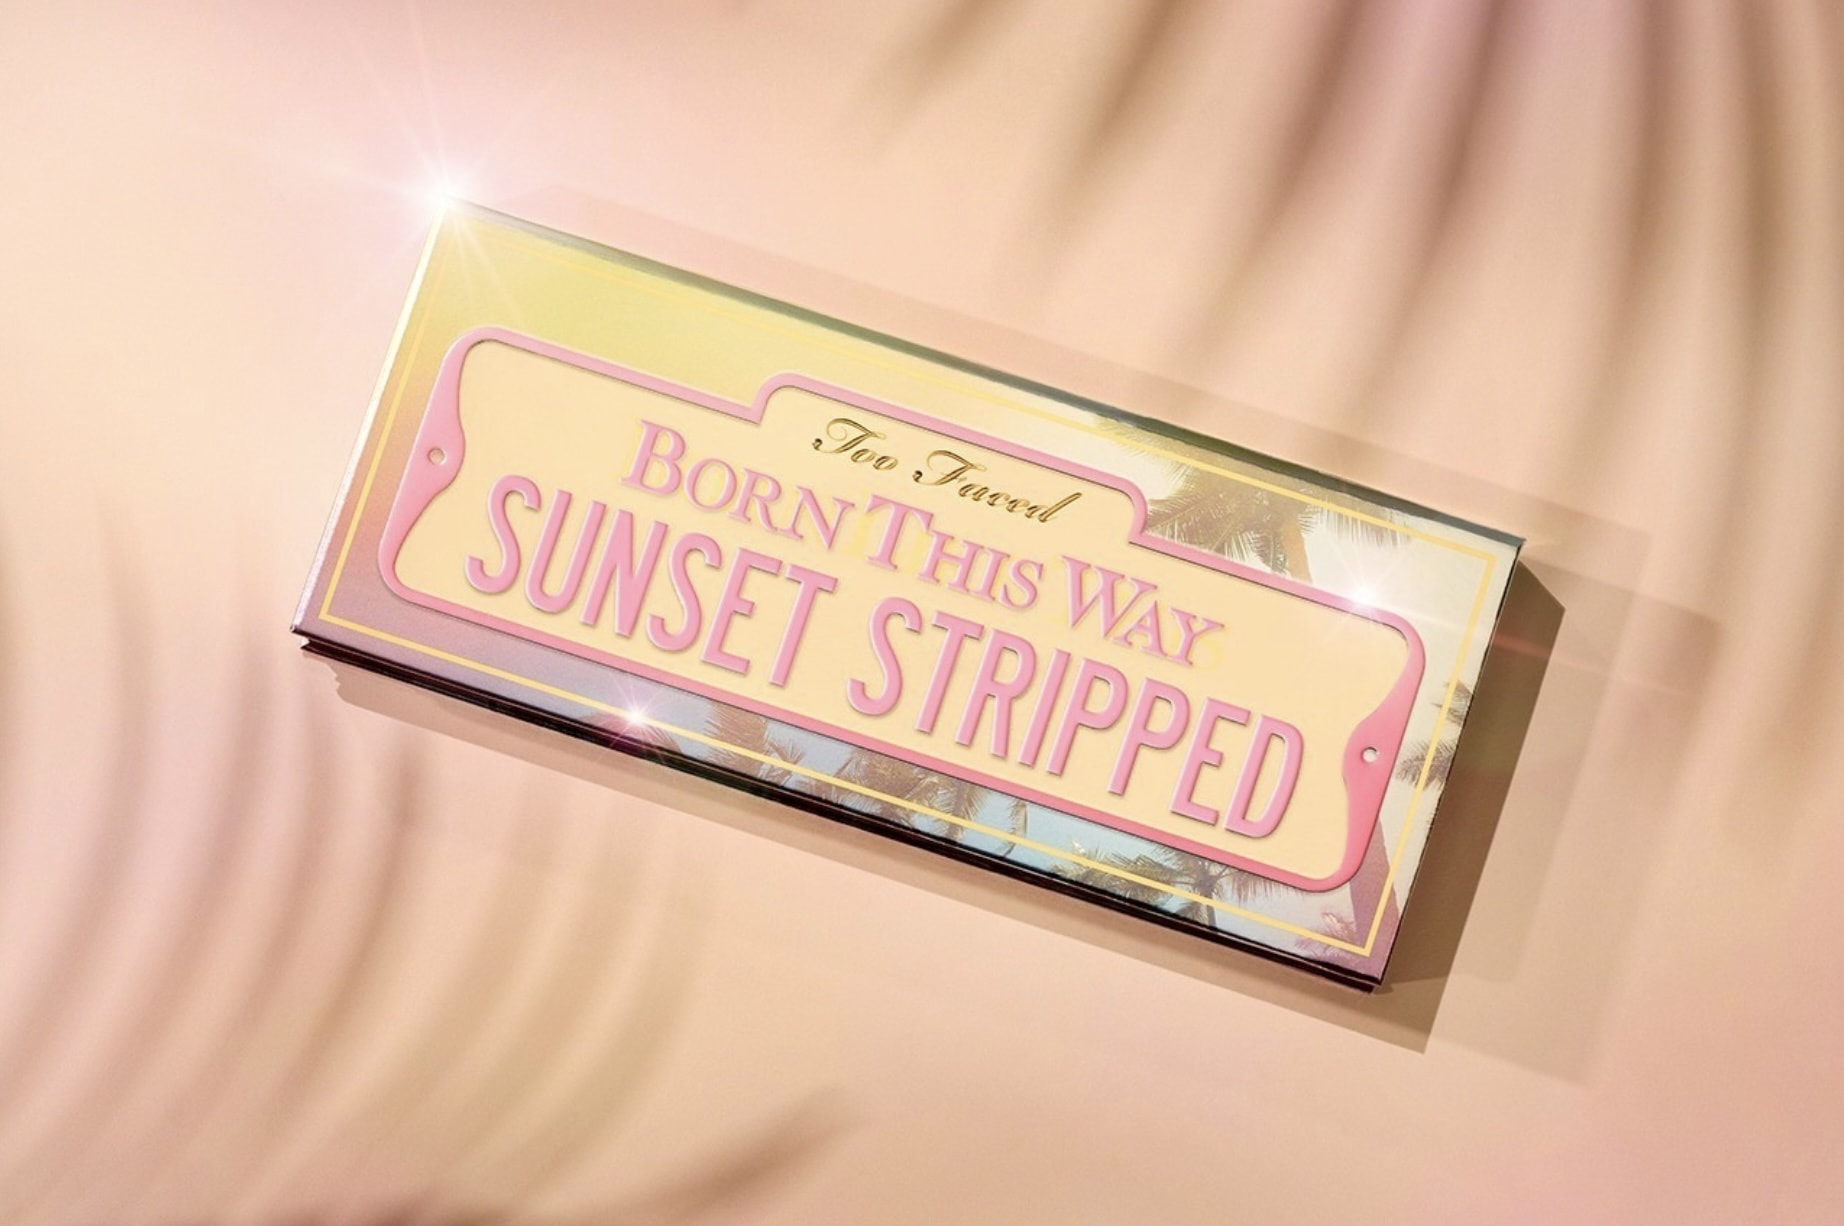 too faced collection ete 2022